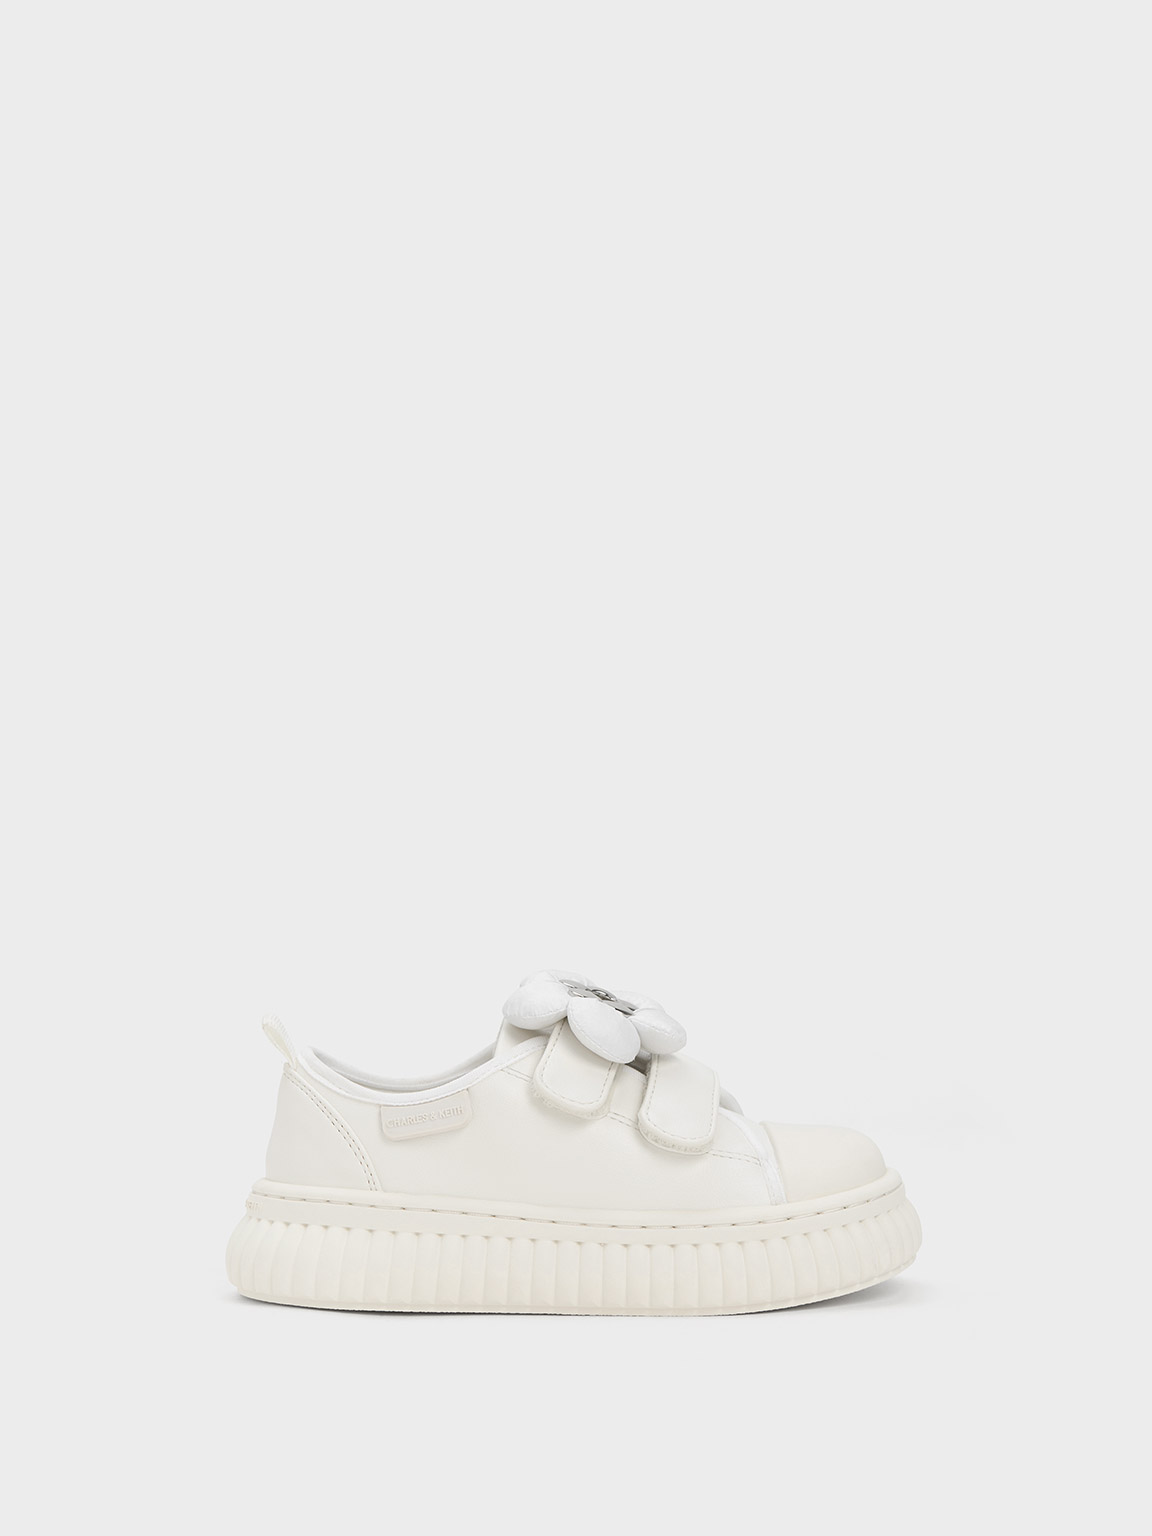 Charles & Keith - Girls' Puffy Flower Sneakers In White